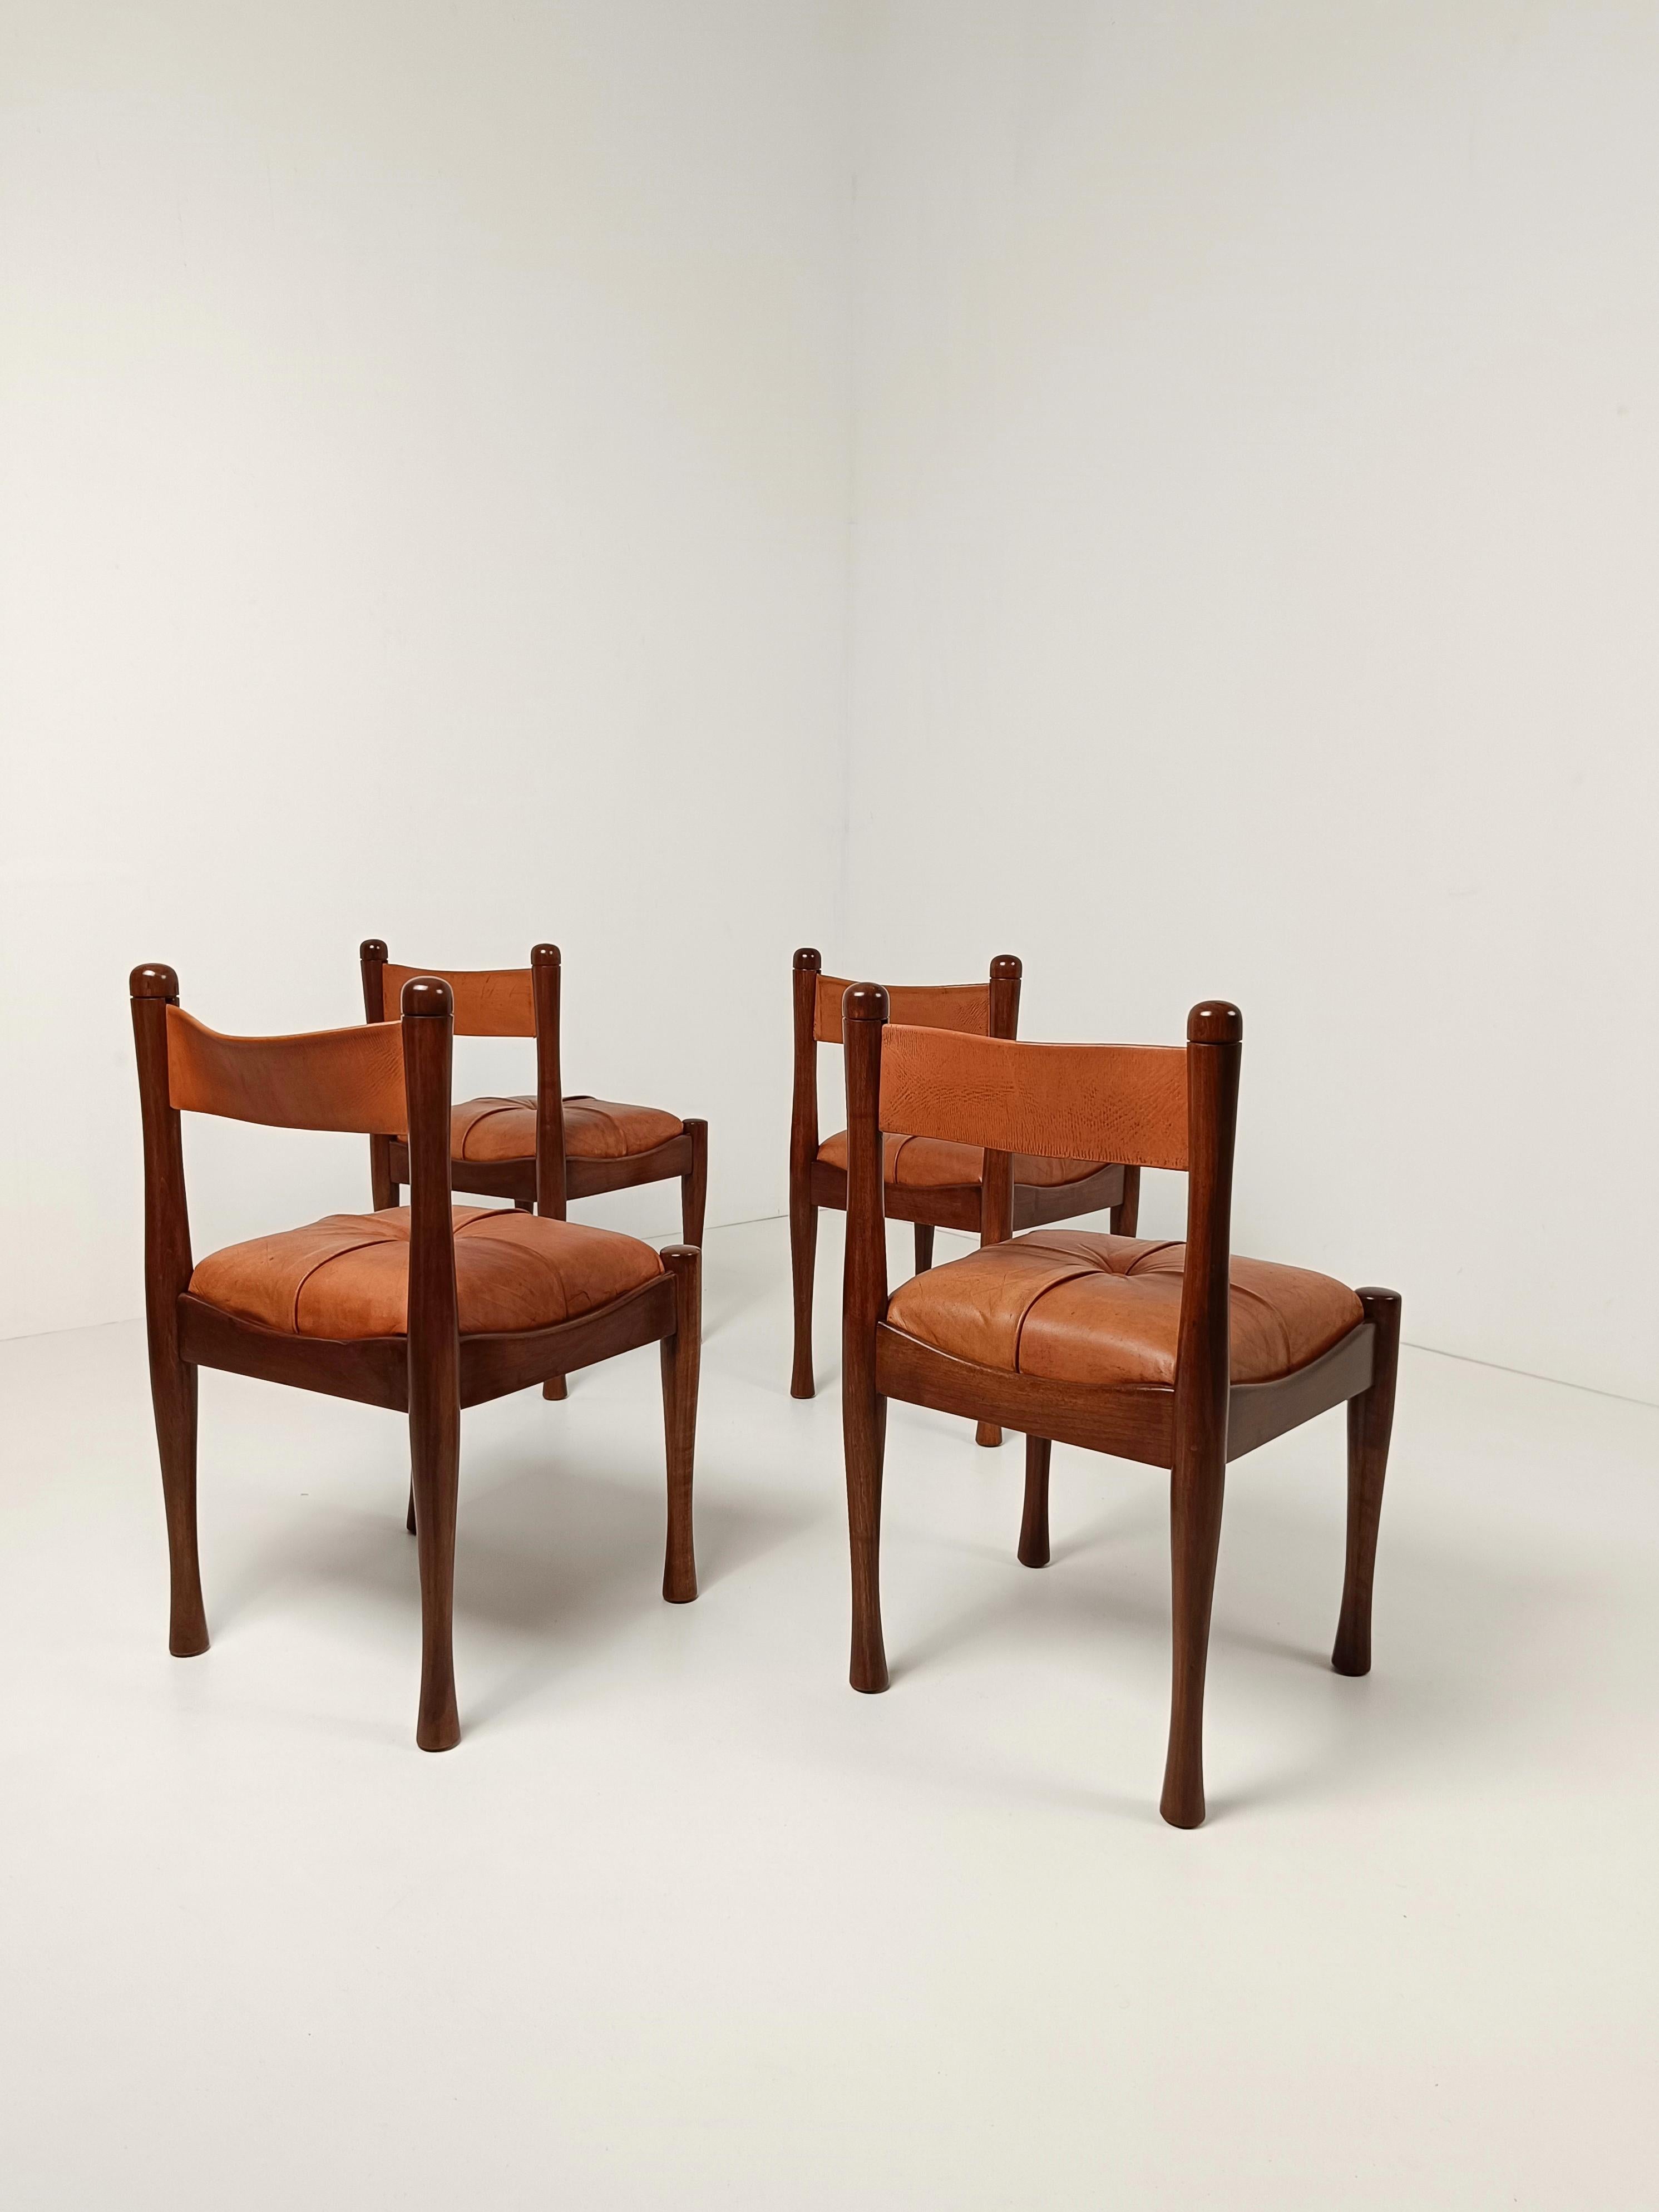 A set of 4 Italian Chairs in Wood and Cognac Leather by S. Coppola for Bernini  For Sale 2